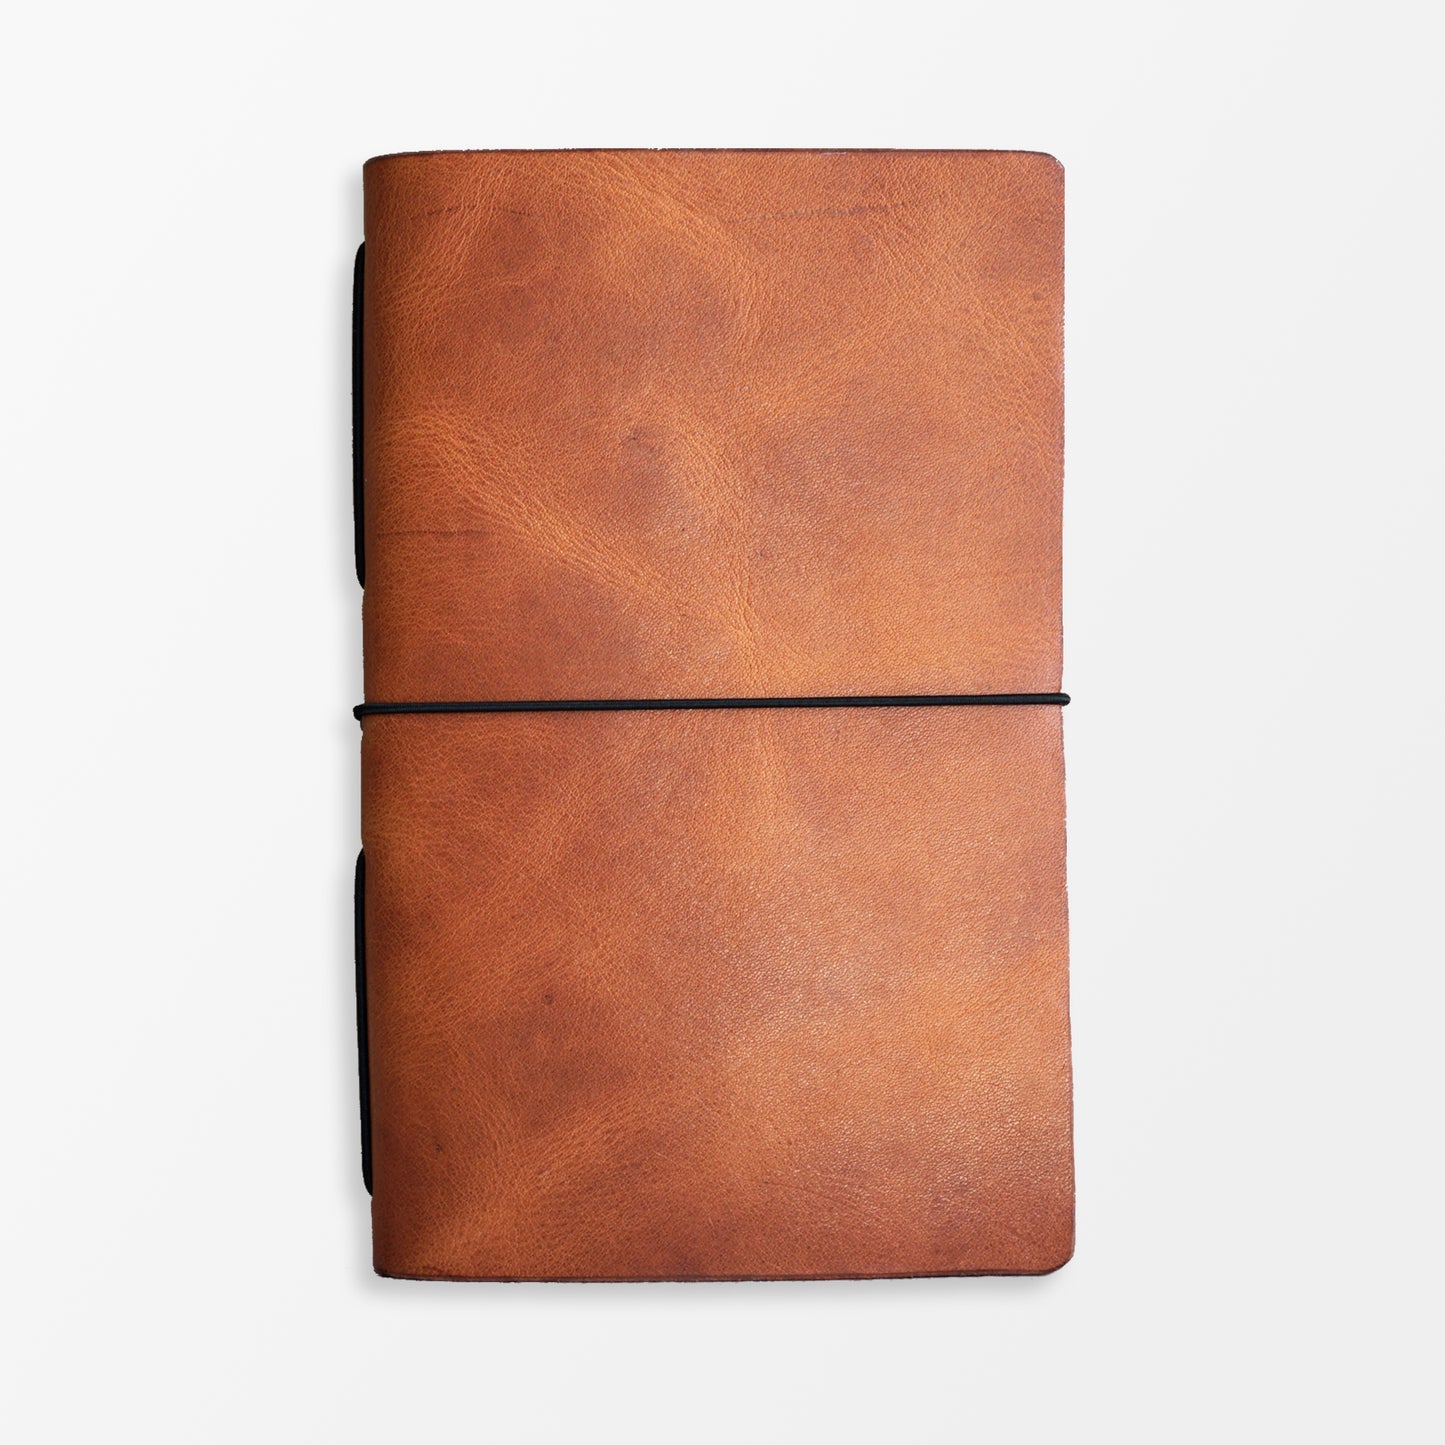 Leather covered Voyageur Notebook from Moleskine - Grierson Studio